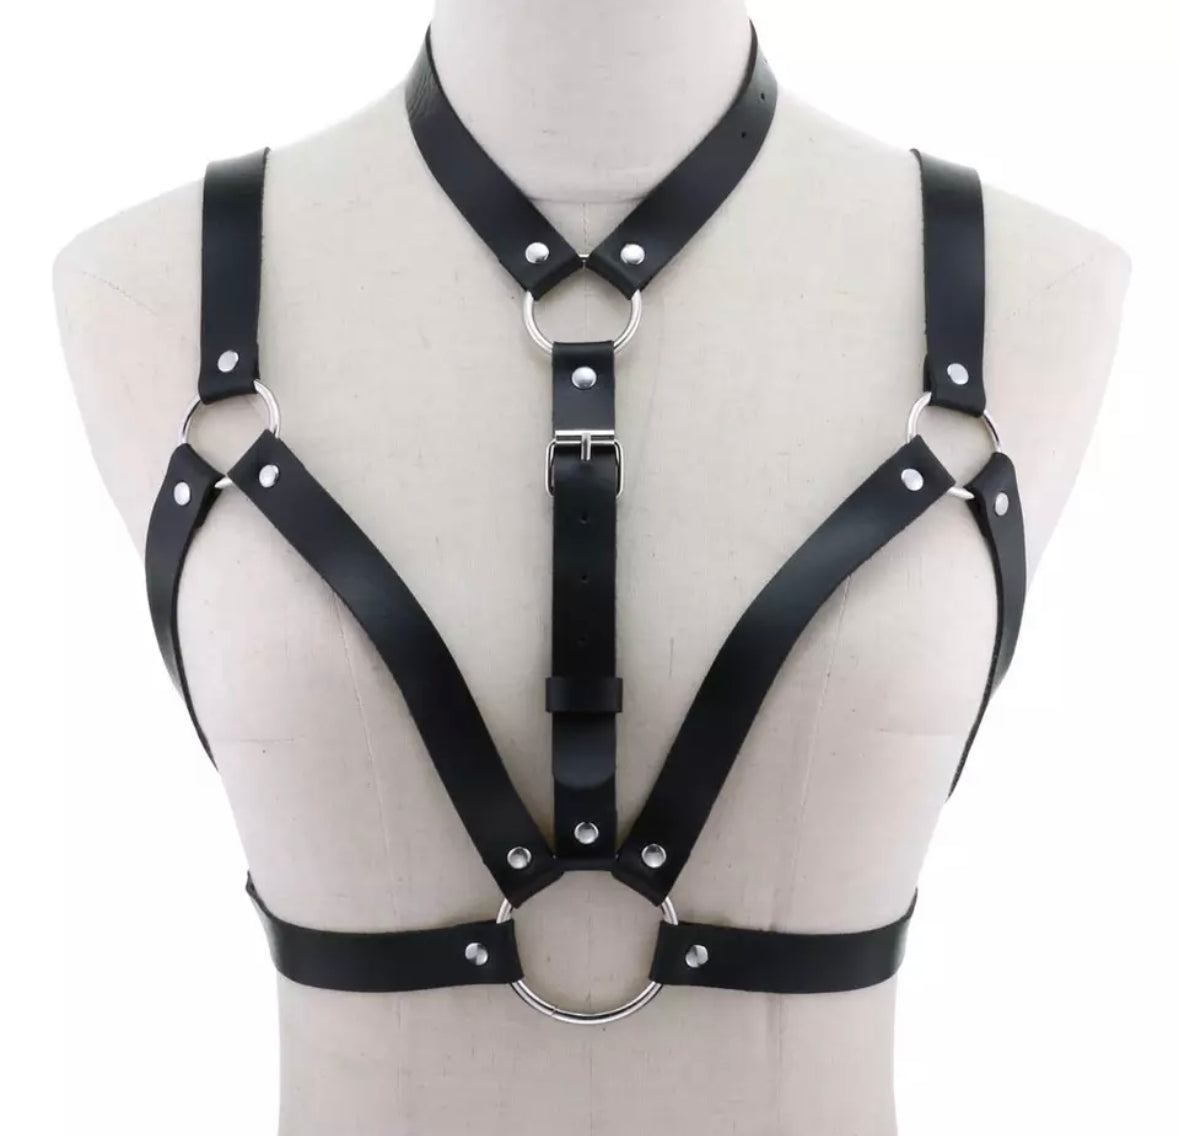 Afro Punk Leather body harness